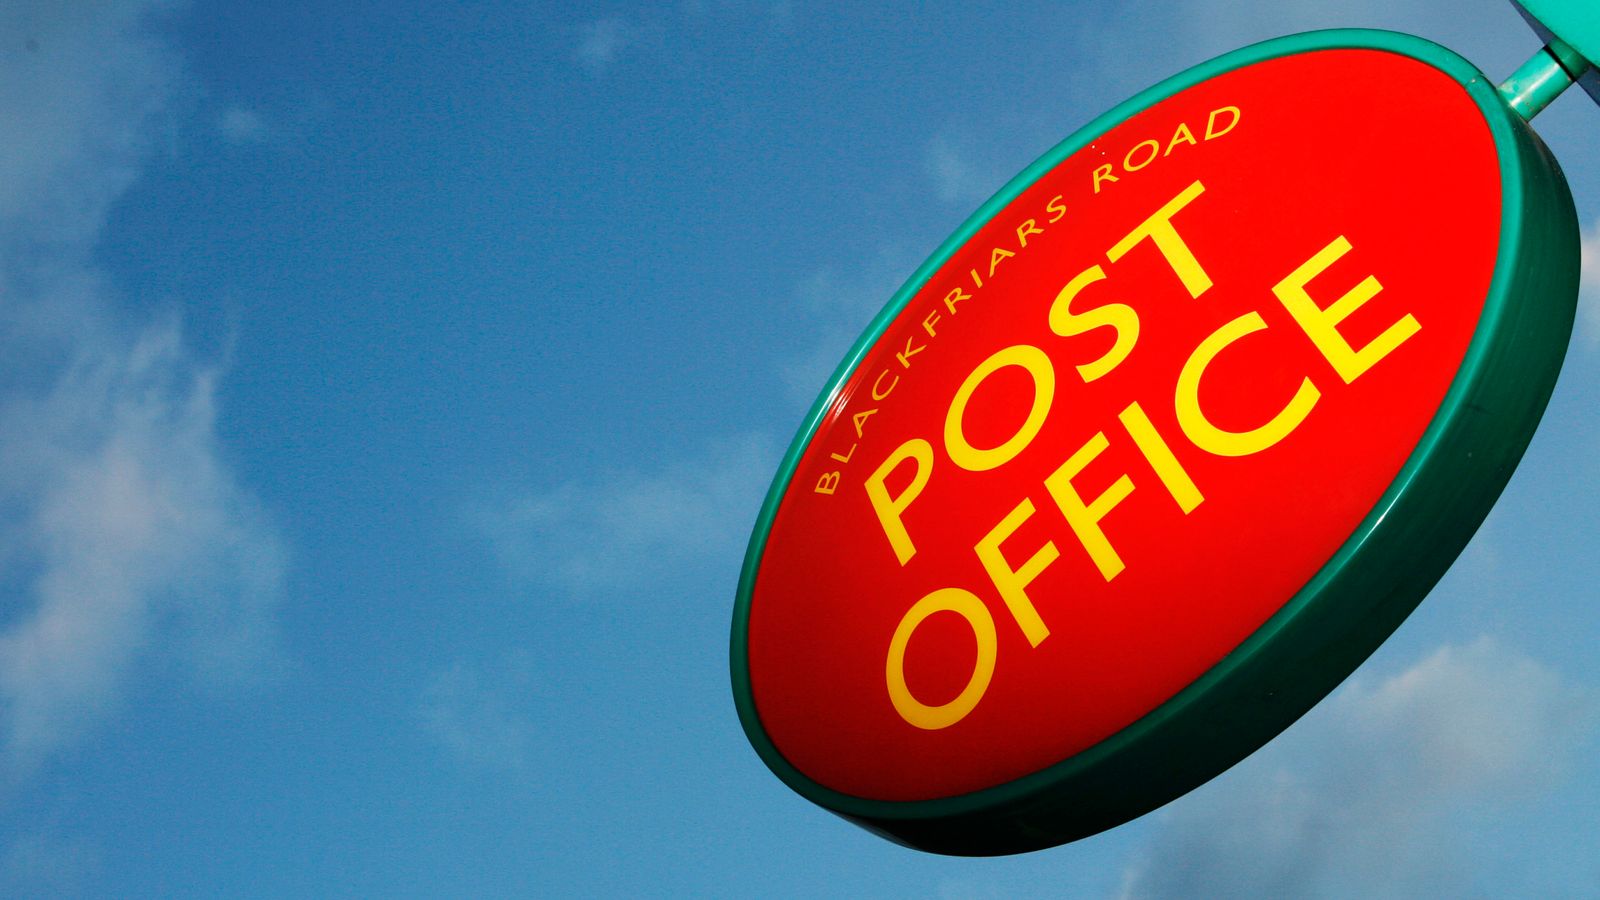 Post Office delivers two board seats to postmasters after Horizon scandal